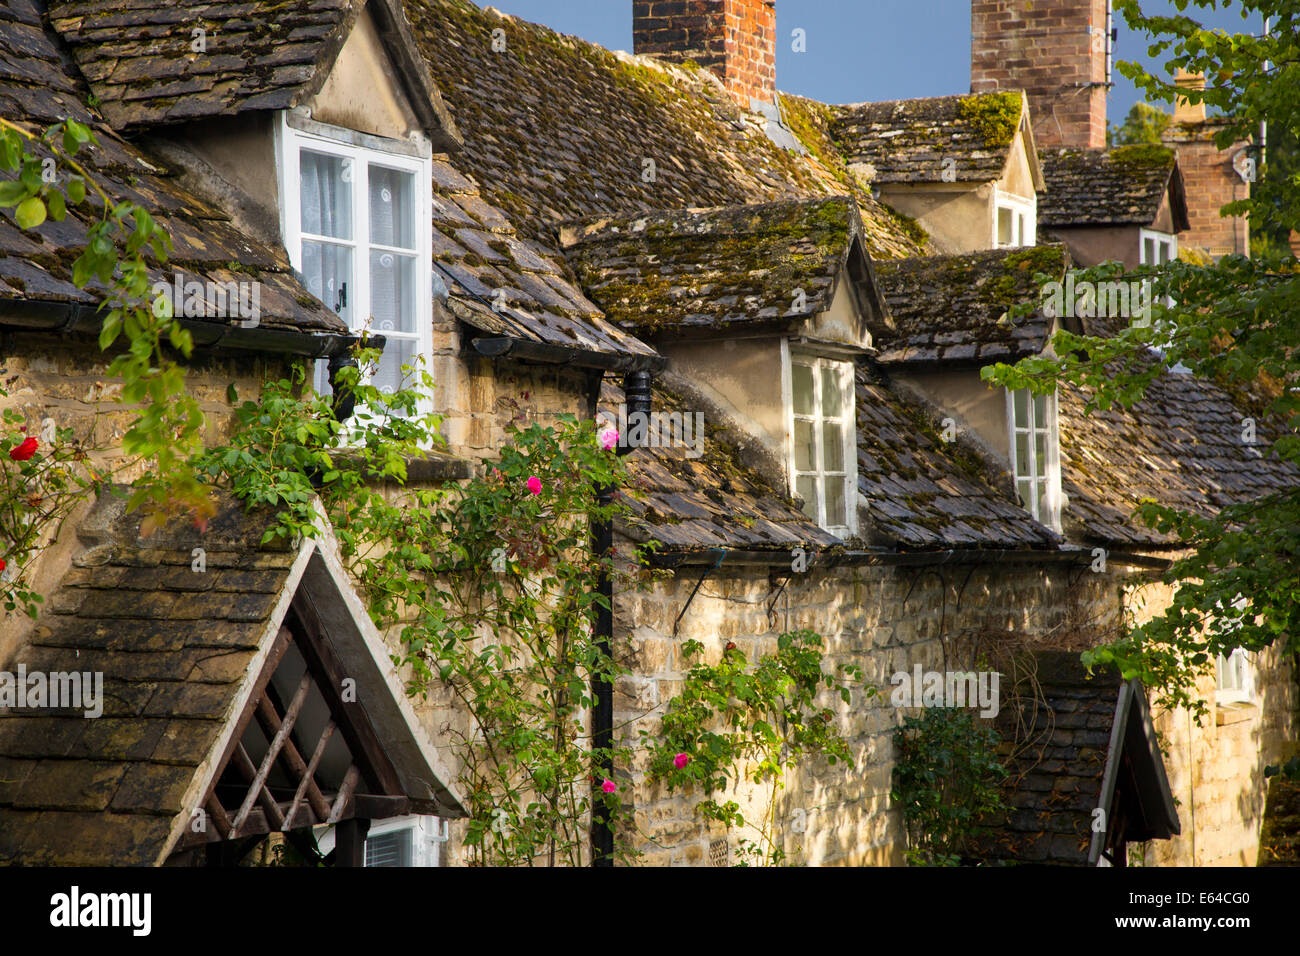 Row of cottages in Winchcombe, Gloucestershire, England Stock Photo